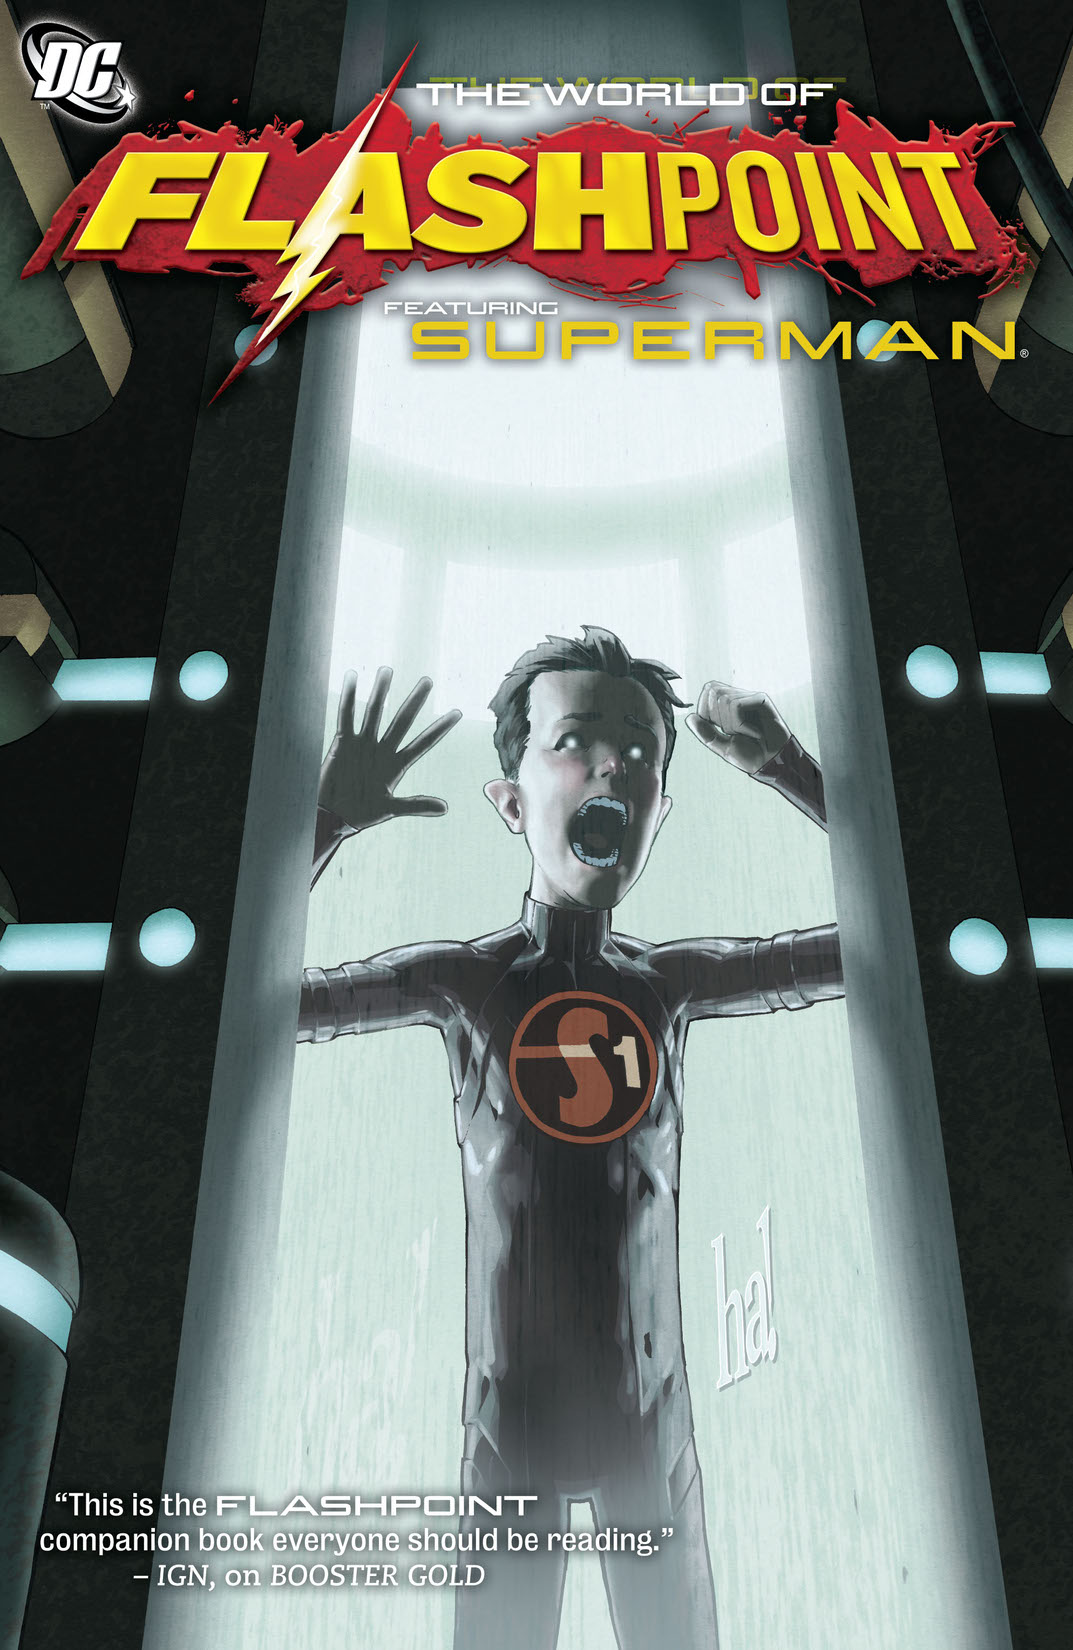 Flashpoint: The World of Flashpoint Featuring Superman preview images